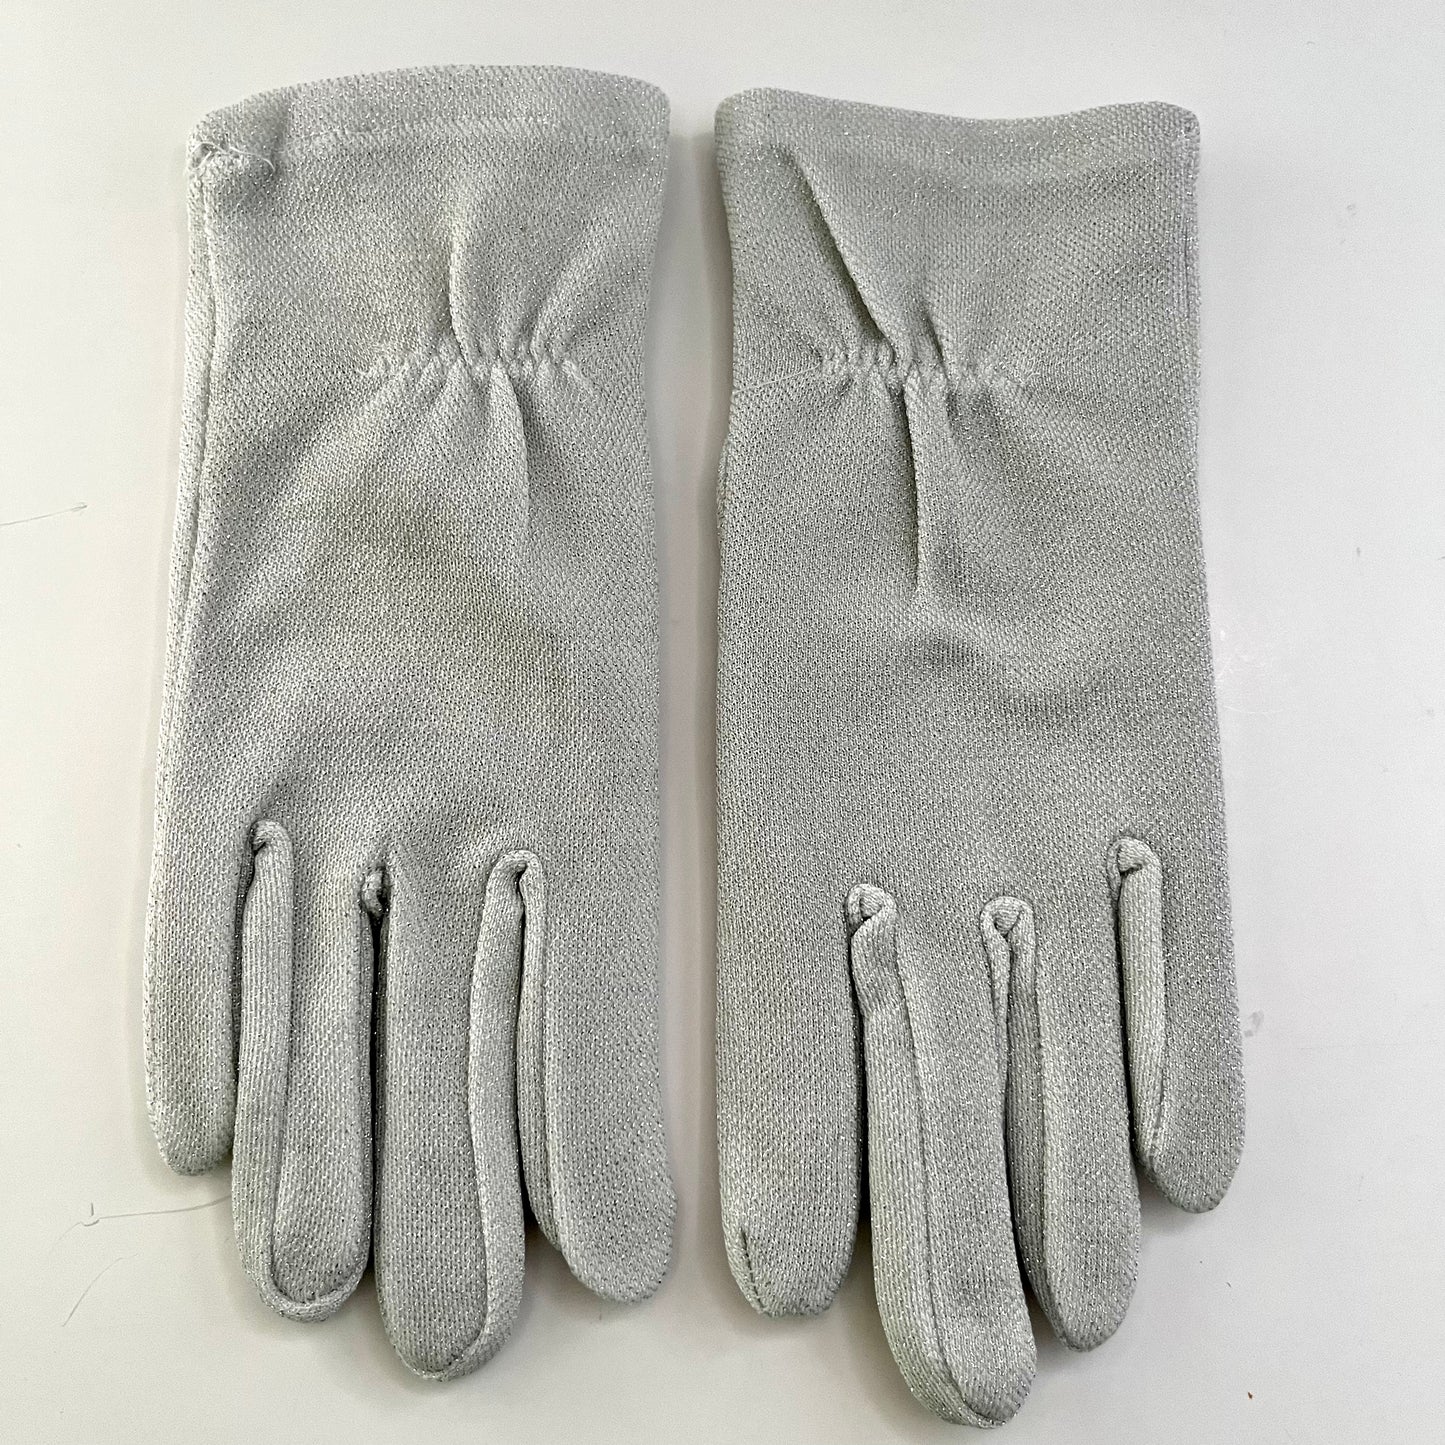 Late 70s/ Early 80s Metallic Silver Stretch Gloves